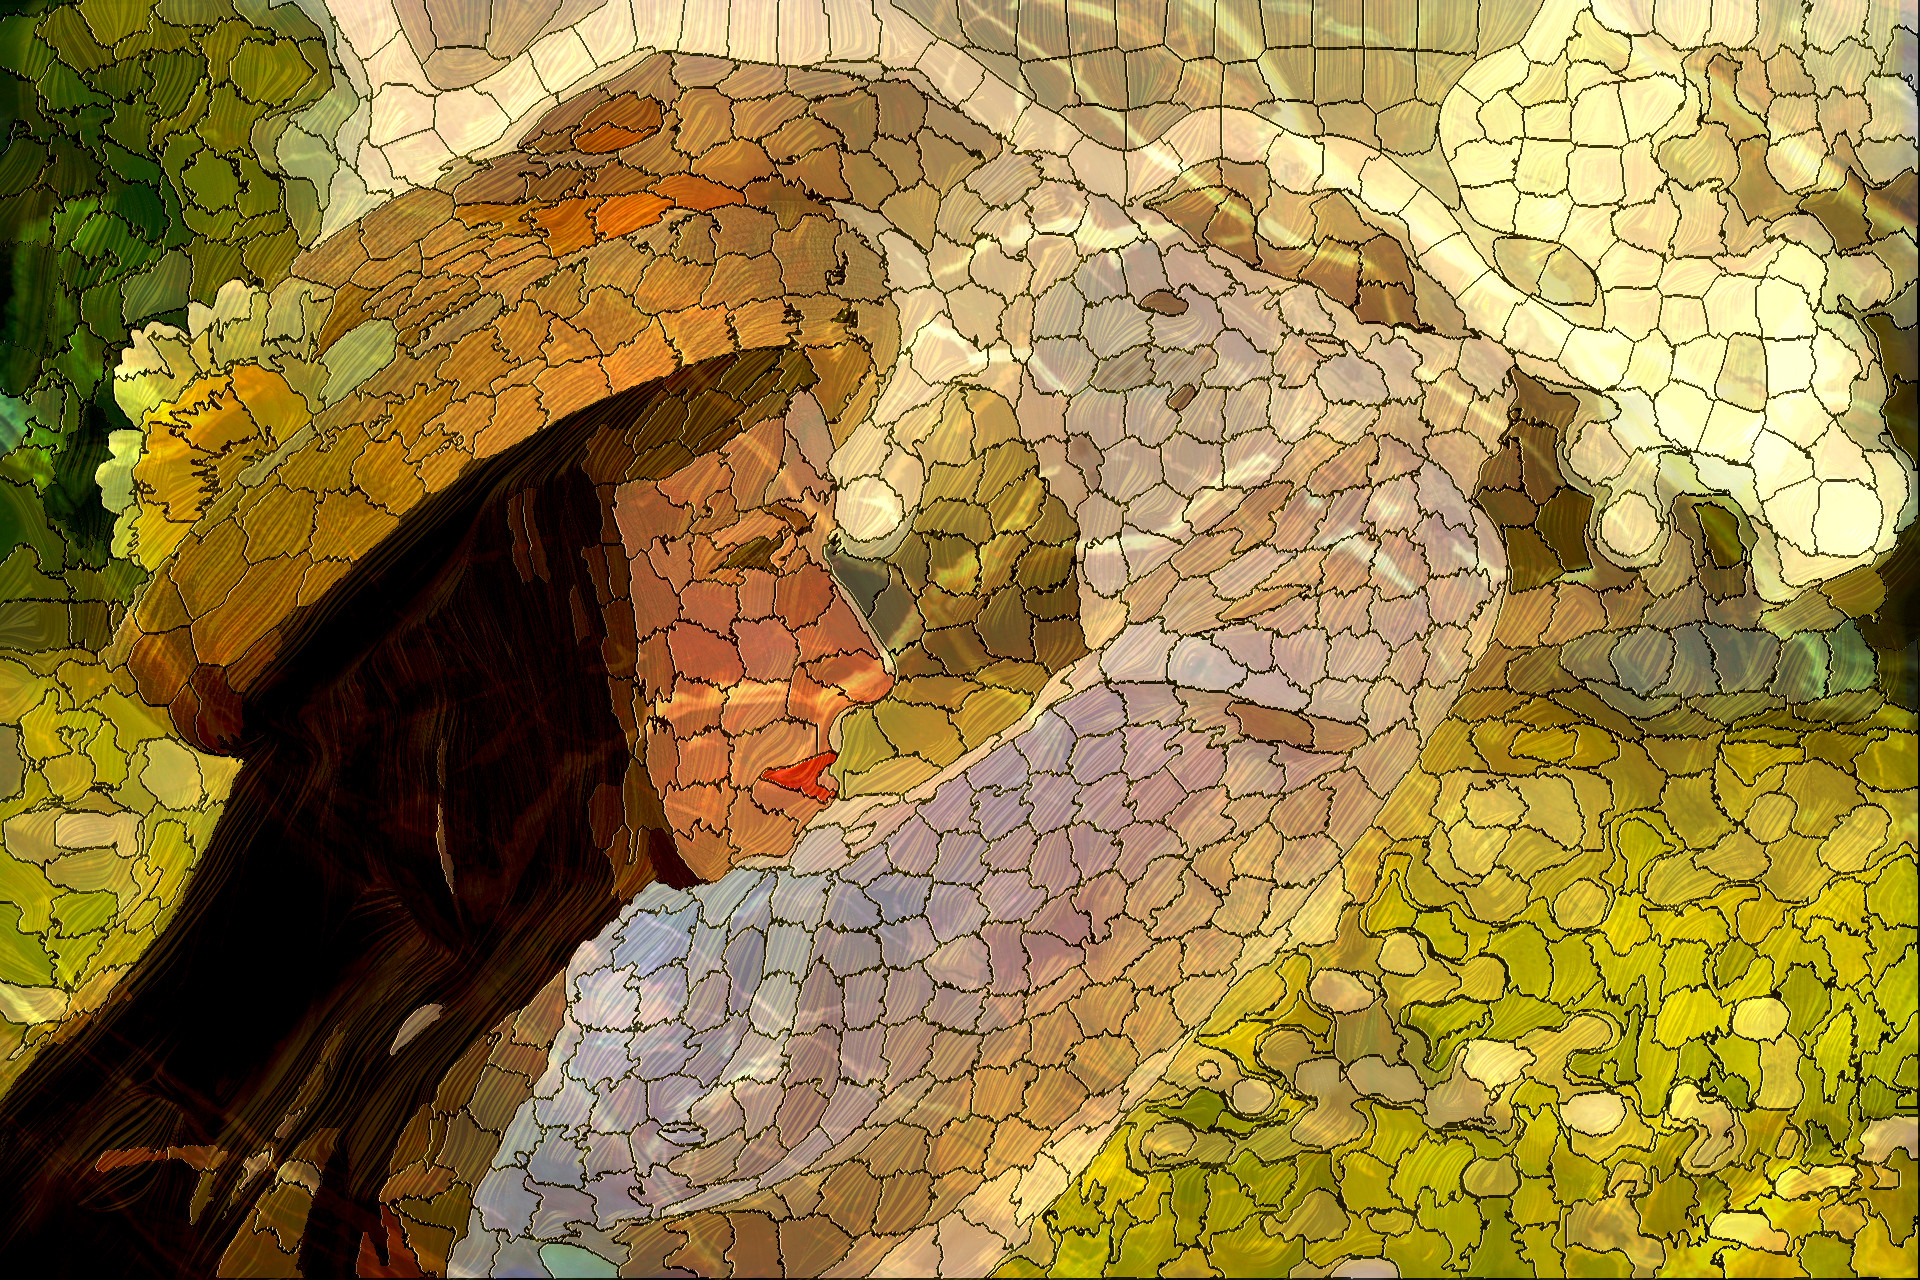 2023-09-02 09-05-50woman-1509959_1920 with a simple mosaic effect.jpeg